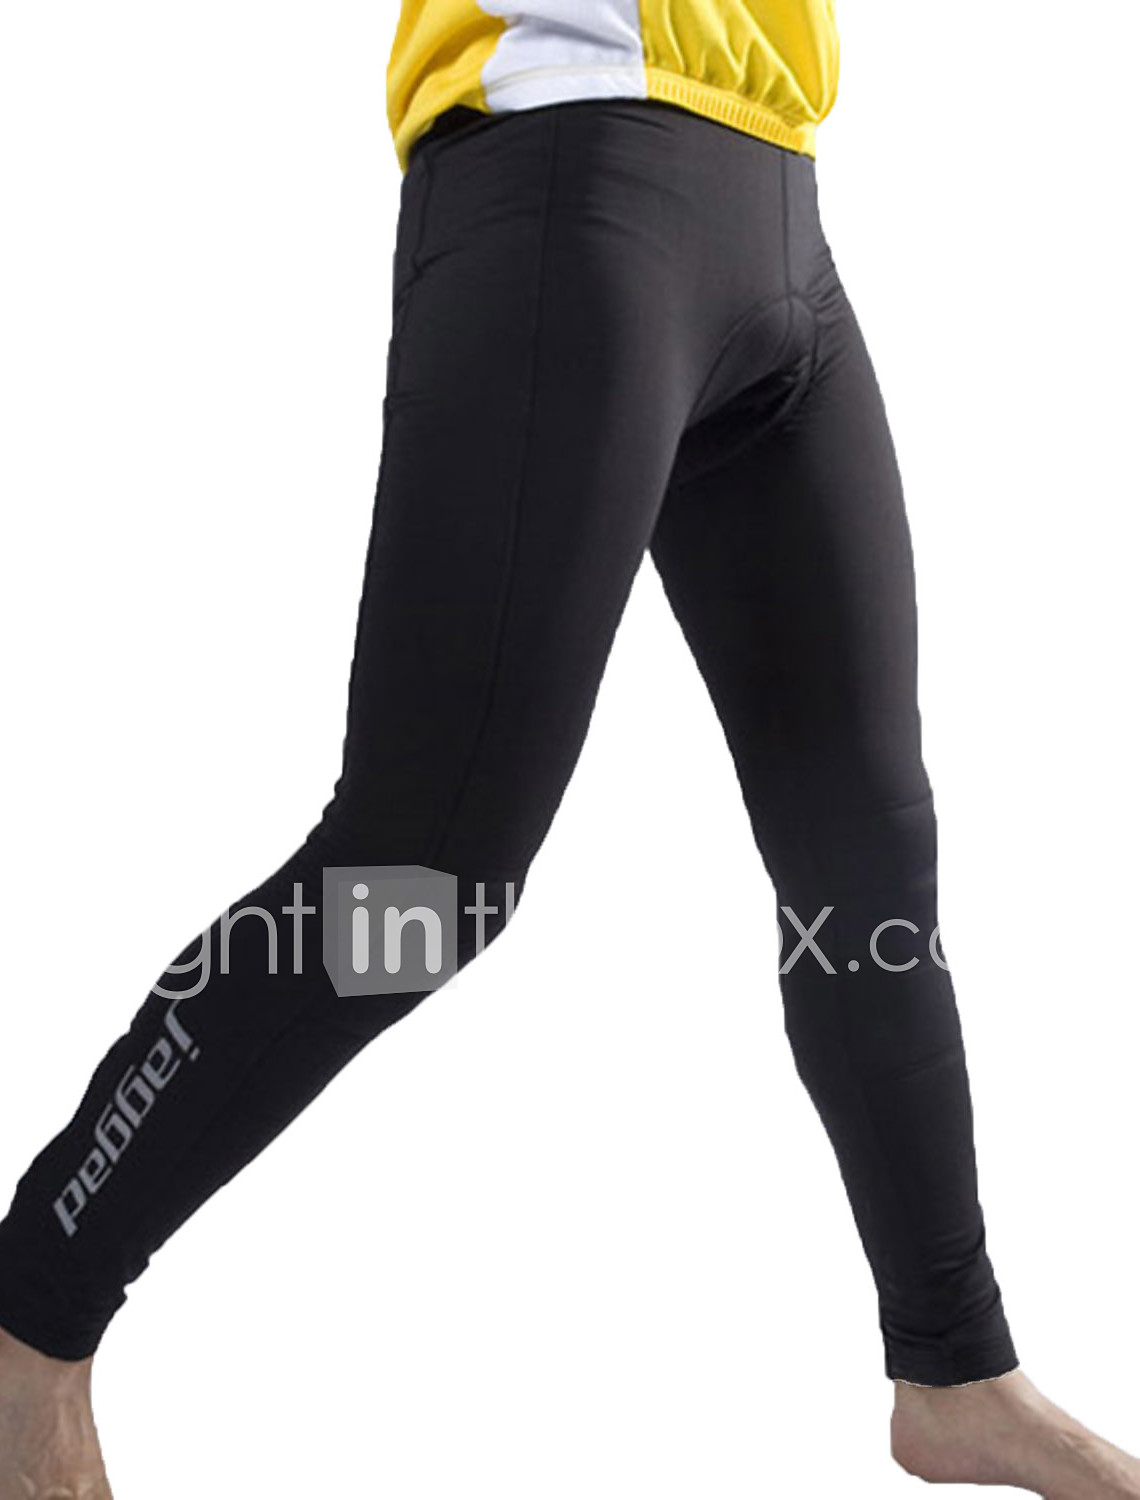 cycling tights without pad